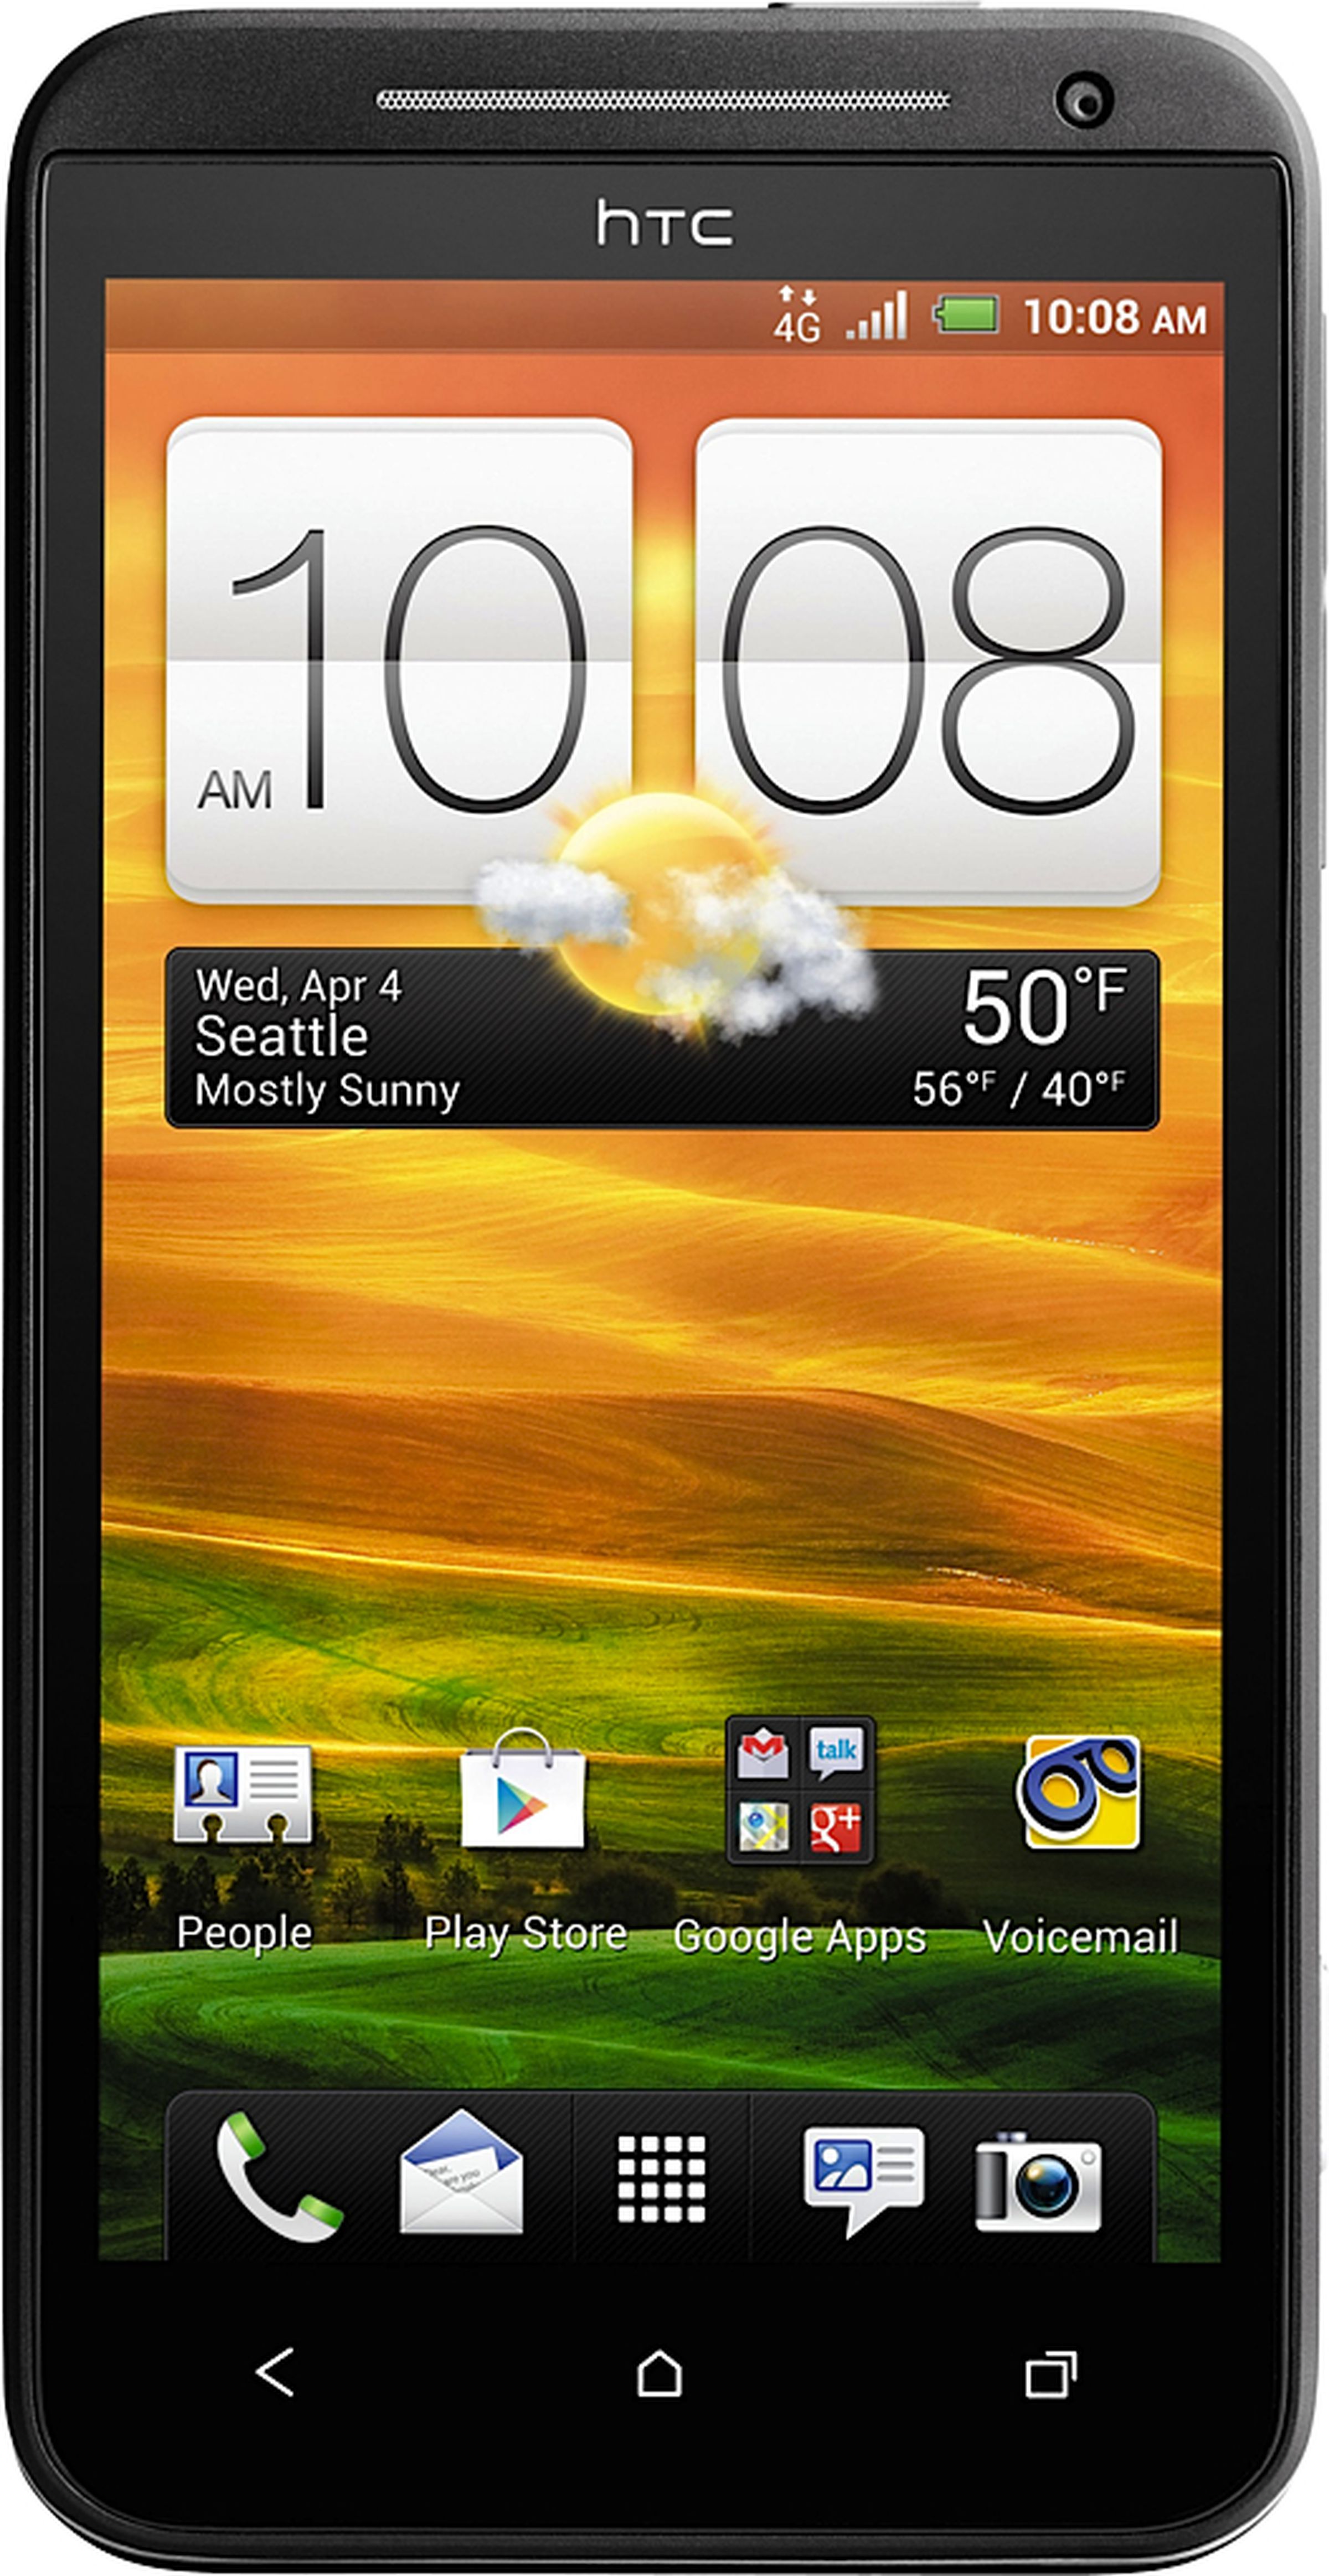 HTC Evo 4G LTE for Sprint press images